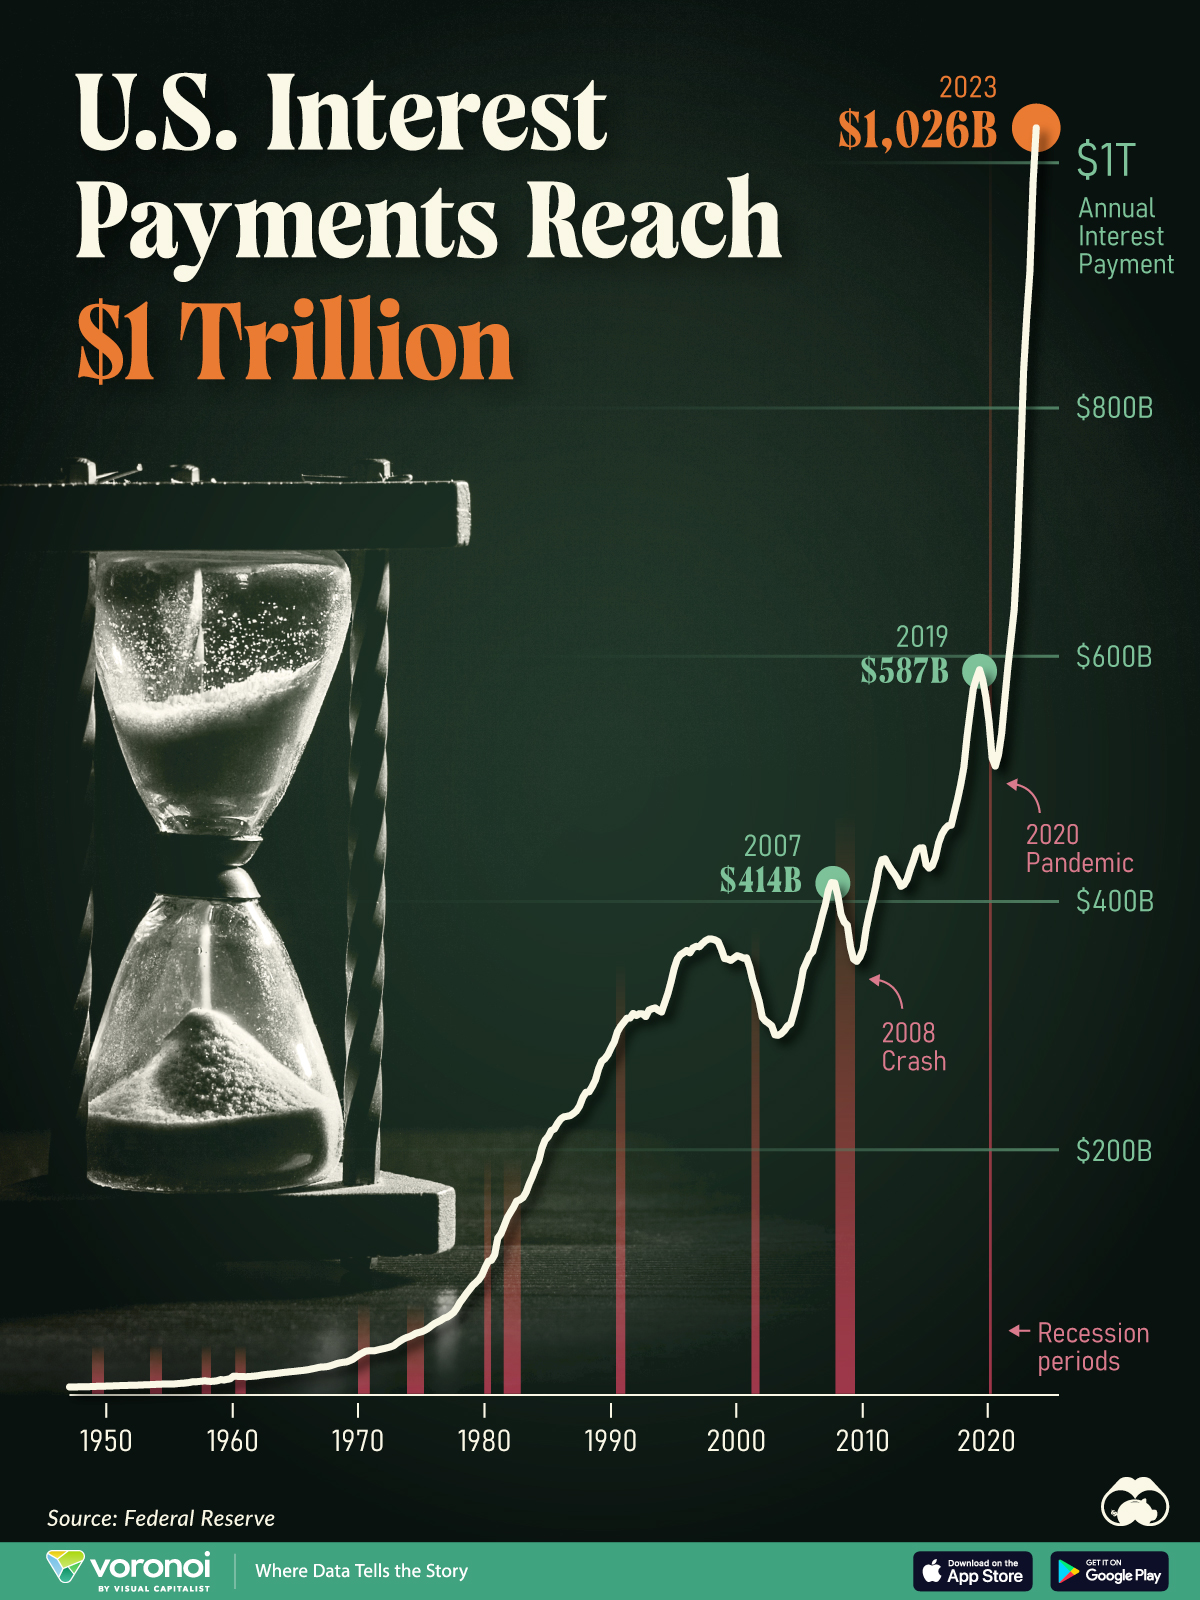 This line chart shows the $1 trillion in U.S. debt interest payments.